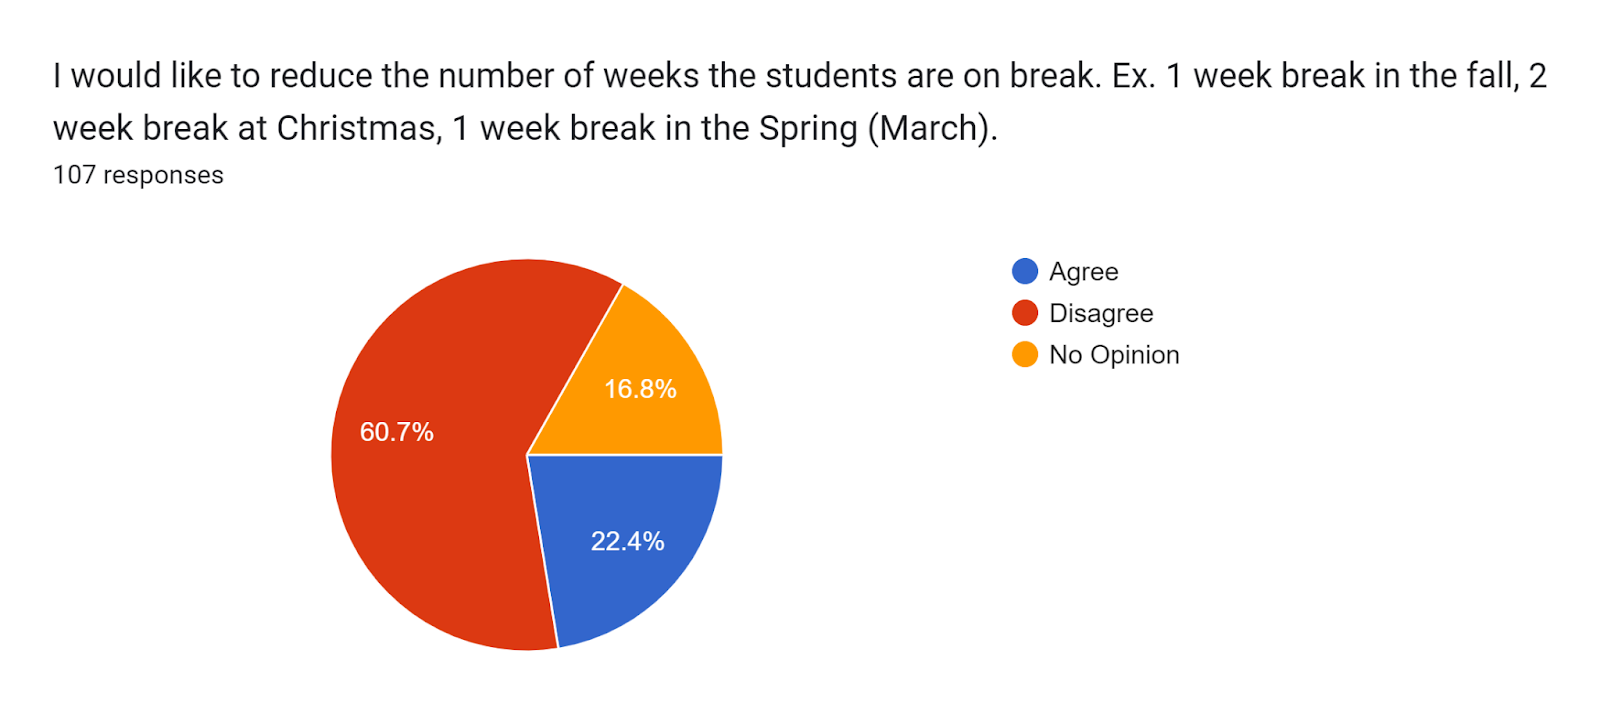 Forms response chart. Question title: I would like to reduce the number of weeks the students are on break. Ex. 1 week break in the fall, 2 week break at Christmas, 1 week break in the Spring (March). . Number of responses: 107 responses.